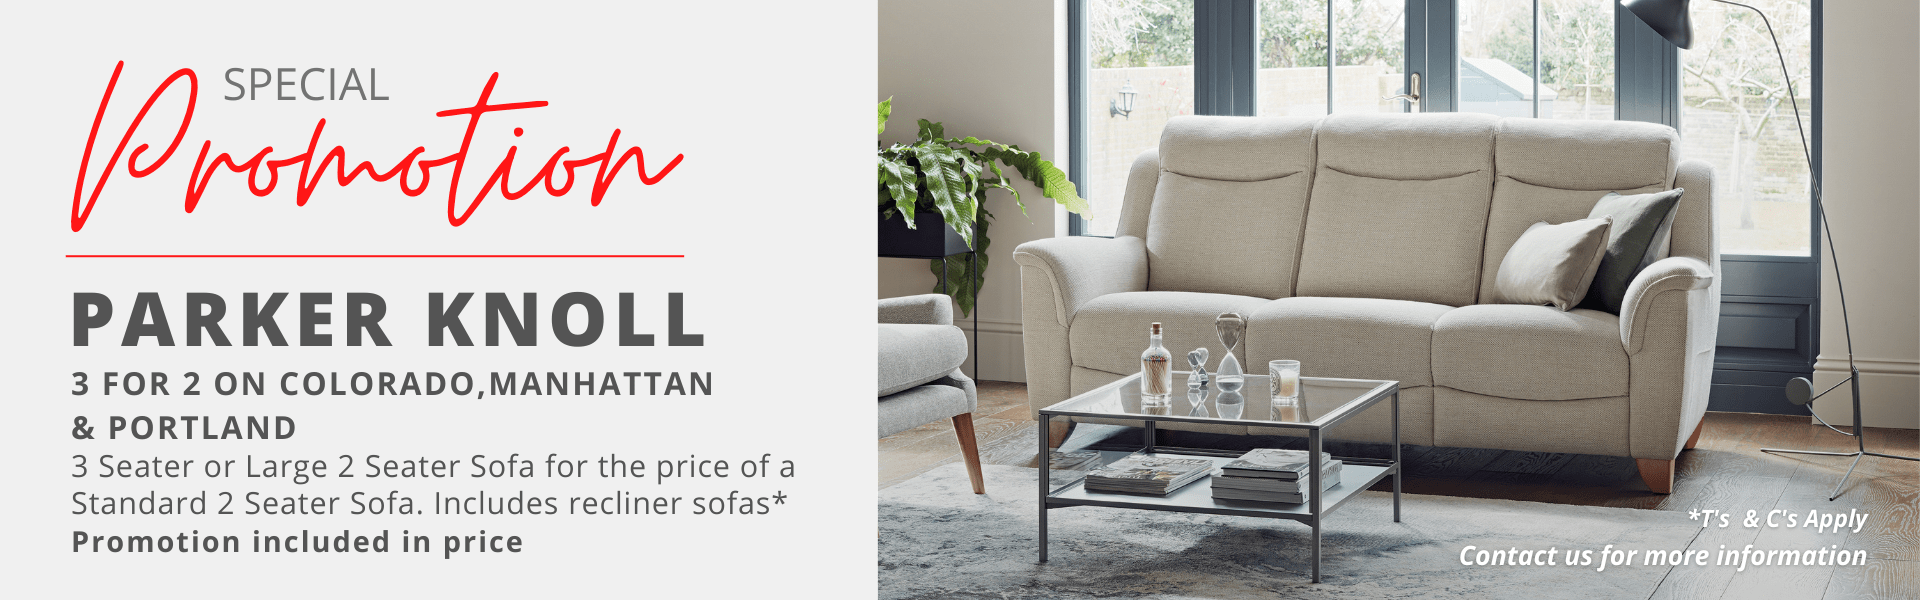 Parker Knoll 3 for 2 Landing Page Banner Lifestyle  